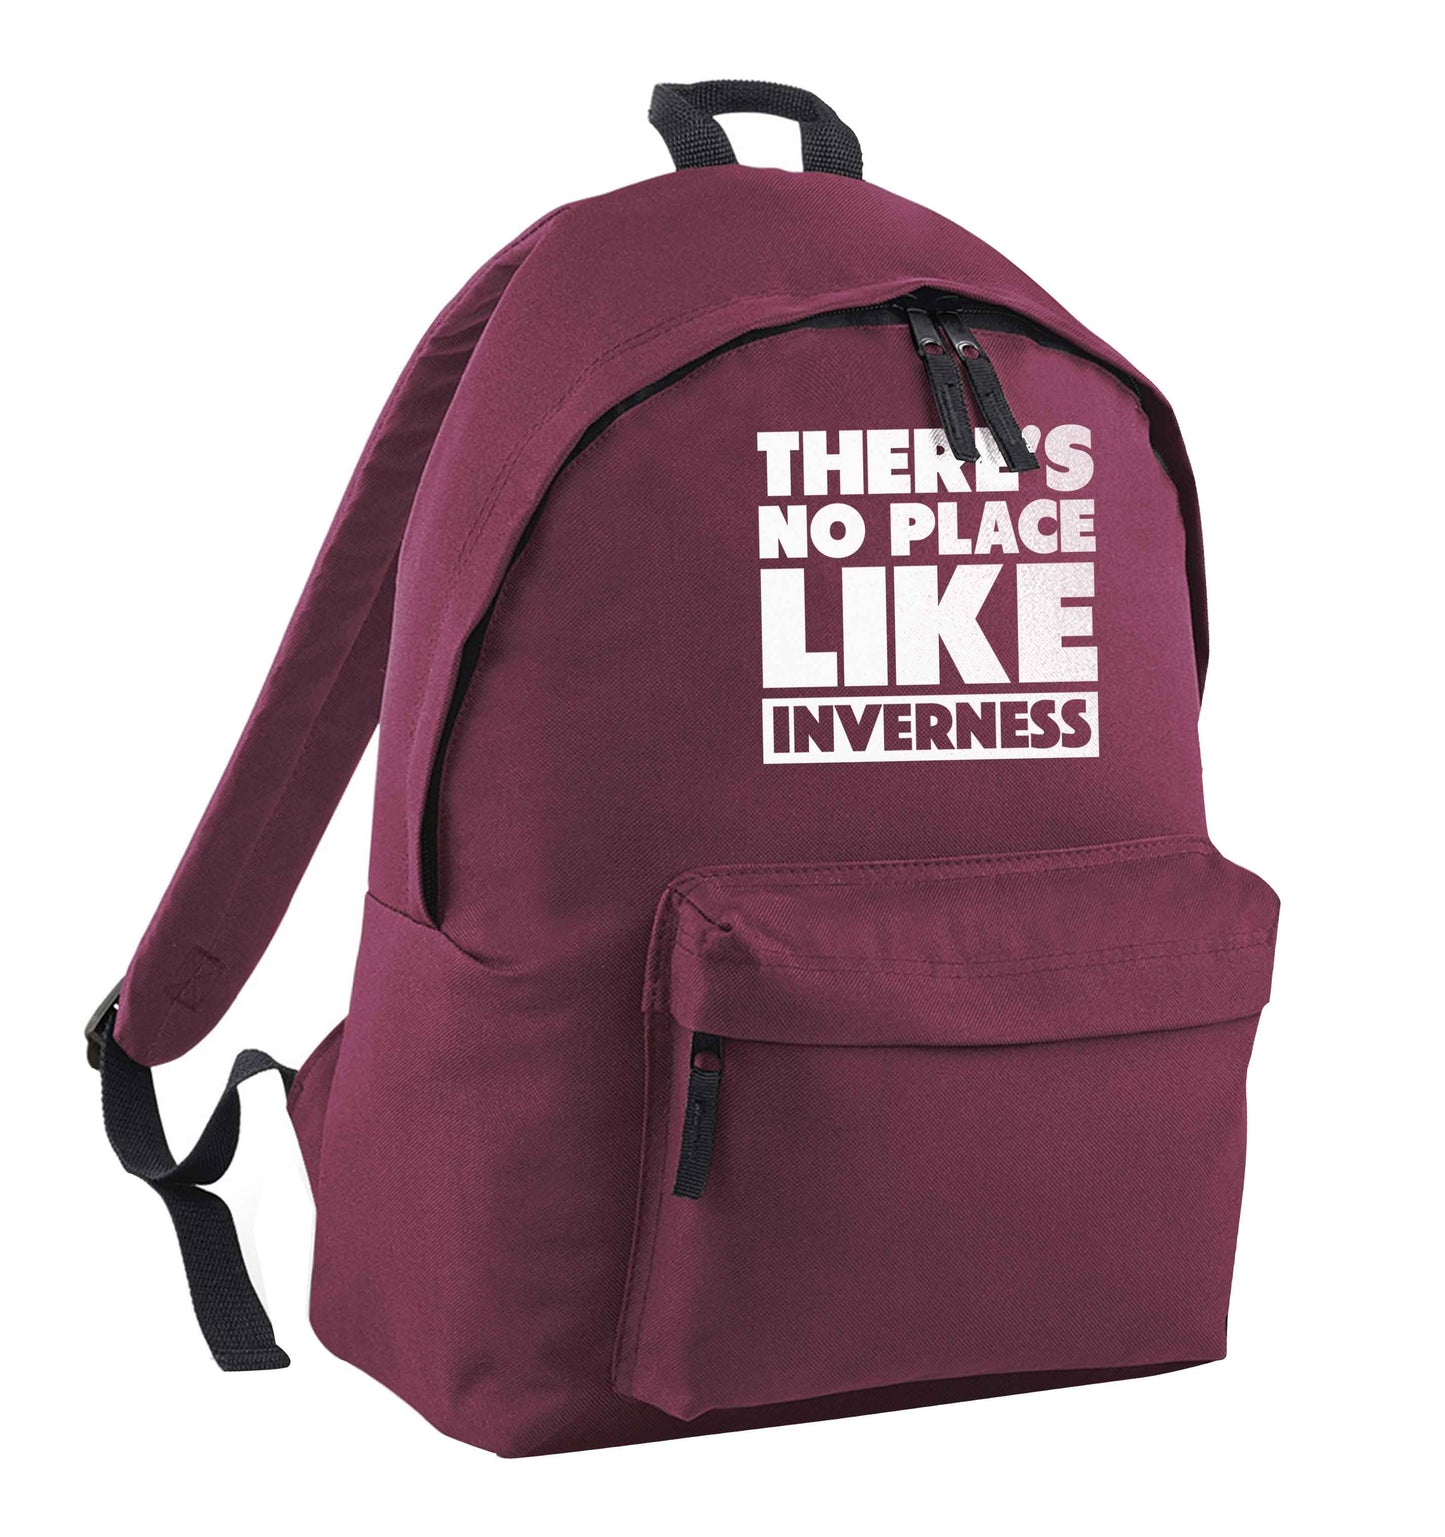 There's no place like Inverness maroon adults backpack